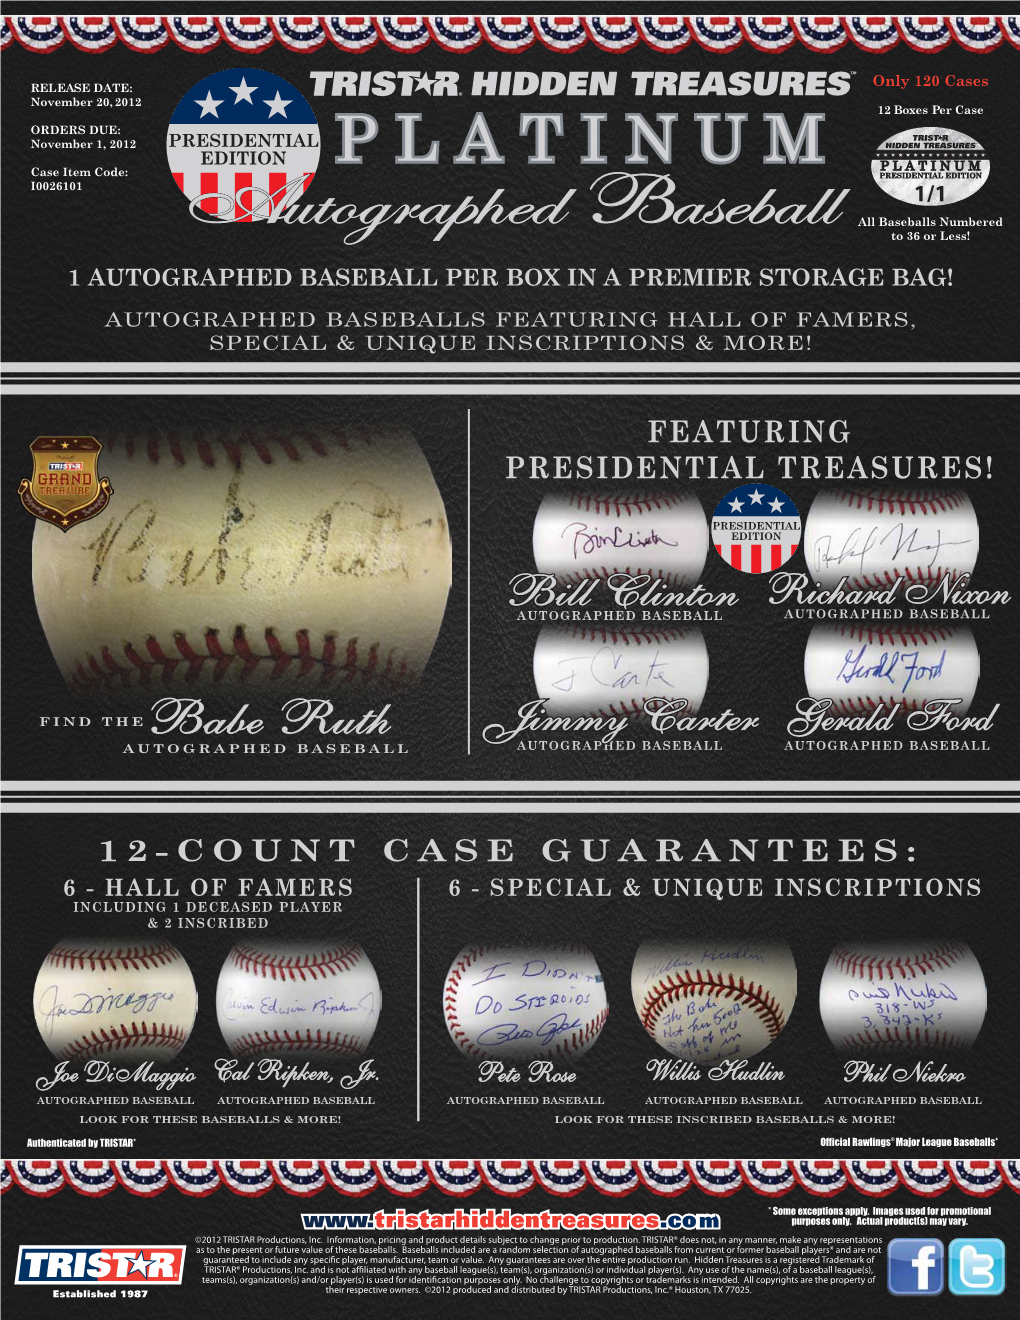 Autographed Baseball to 36 Or Less!